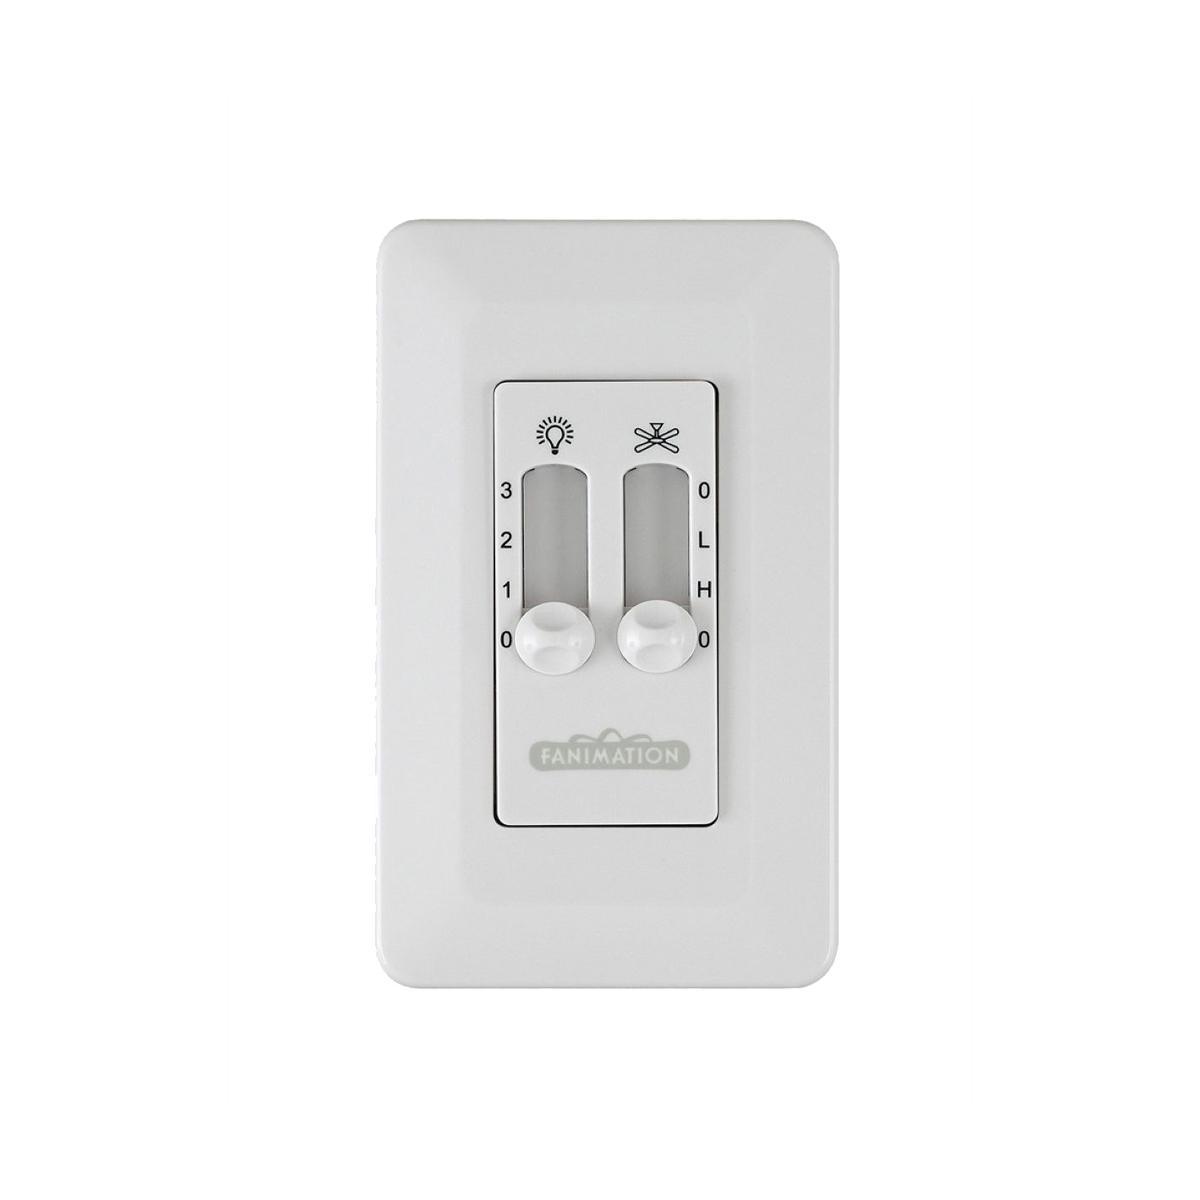 2-Speed Ceiling Fan And Light Wall Control, White Finish - Bees Lighting